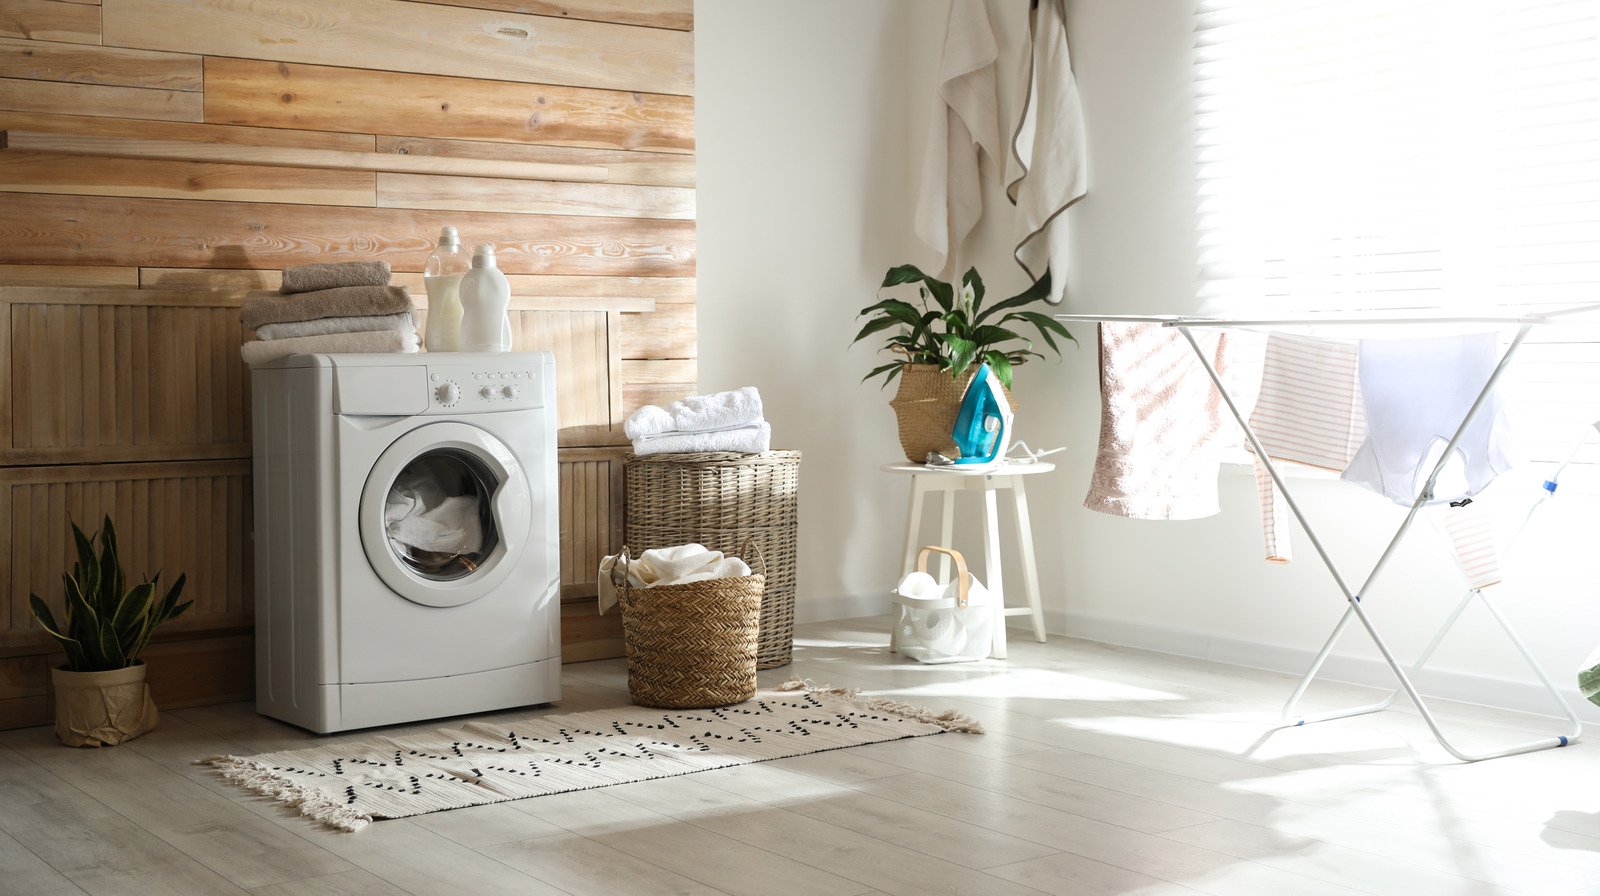 The Best Flooring For Your Laundry Room, According To An Expert